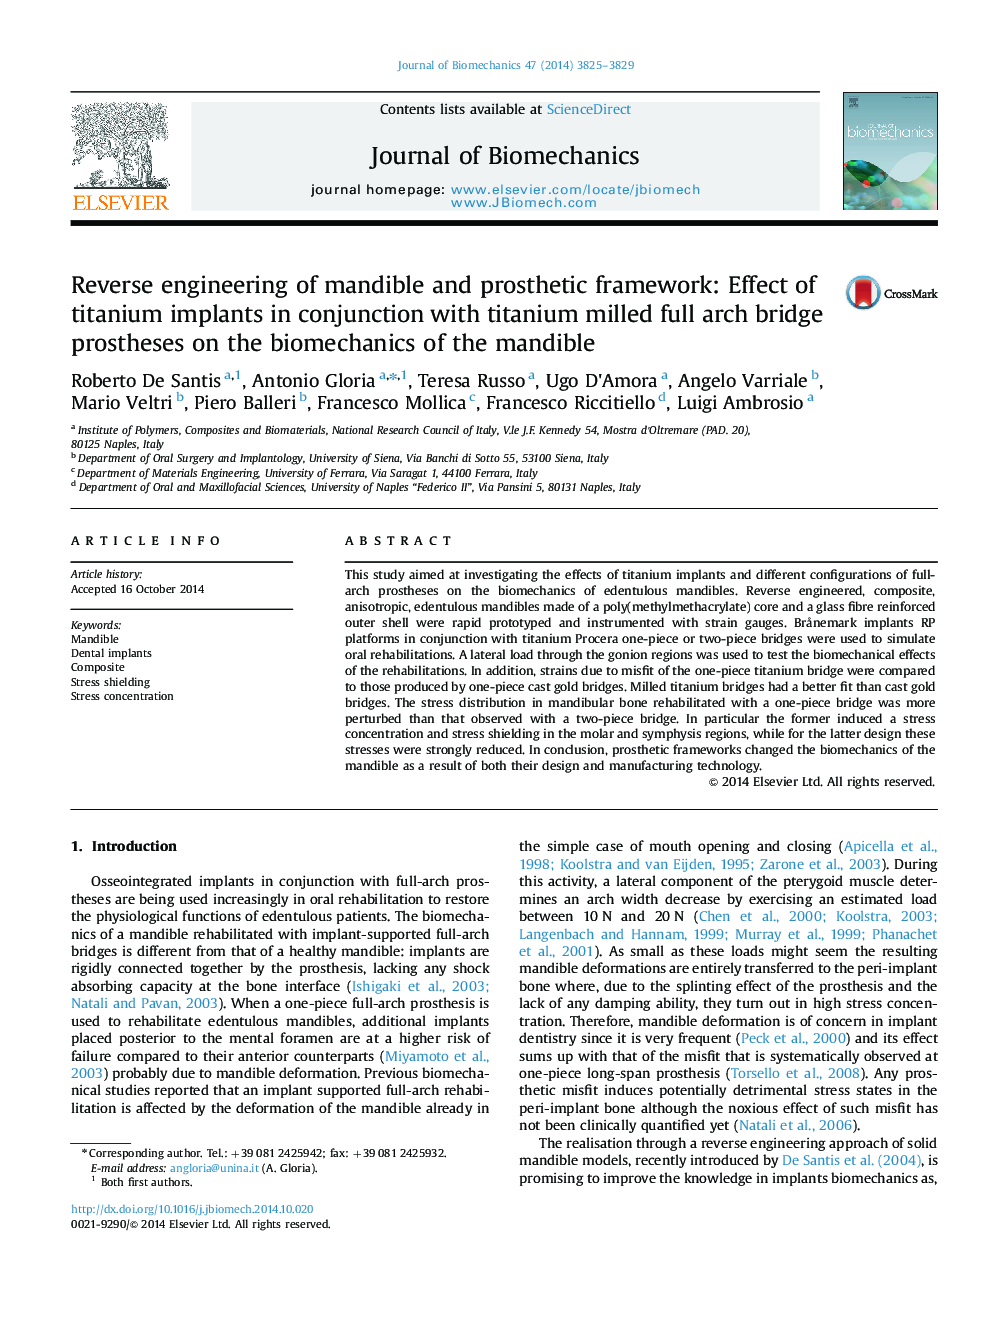 Reverse engineering of mandible and prosthetic framework: Effect of titanium implants in conjunction with titanium milled full arch bridge prostheses on the biomechanics of the mandible